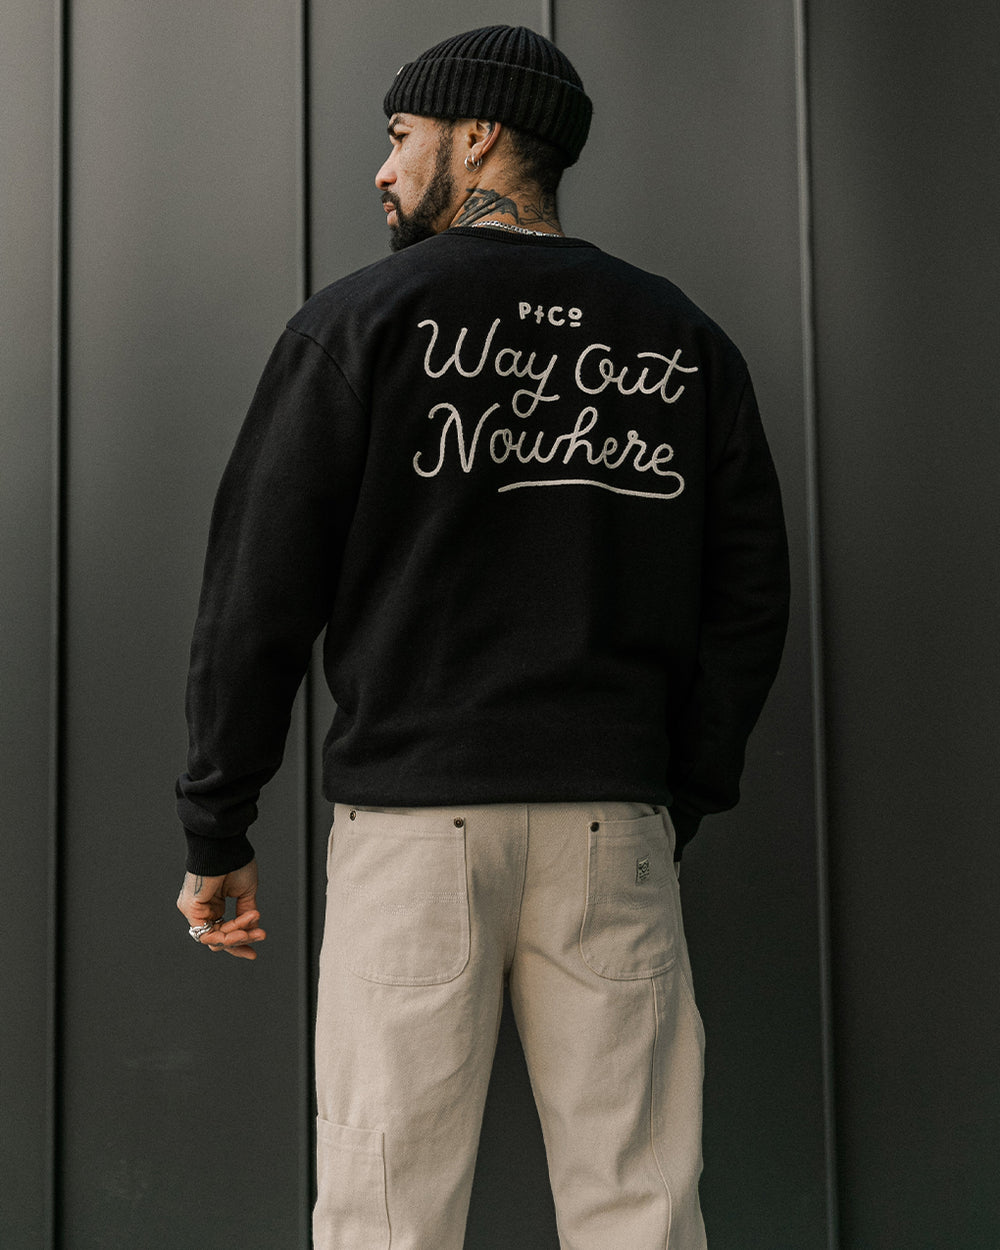 Way Out Nowhere Sweatshirt - Washed Black